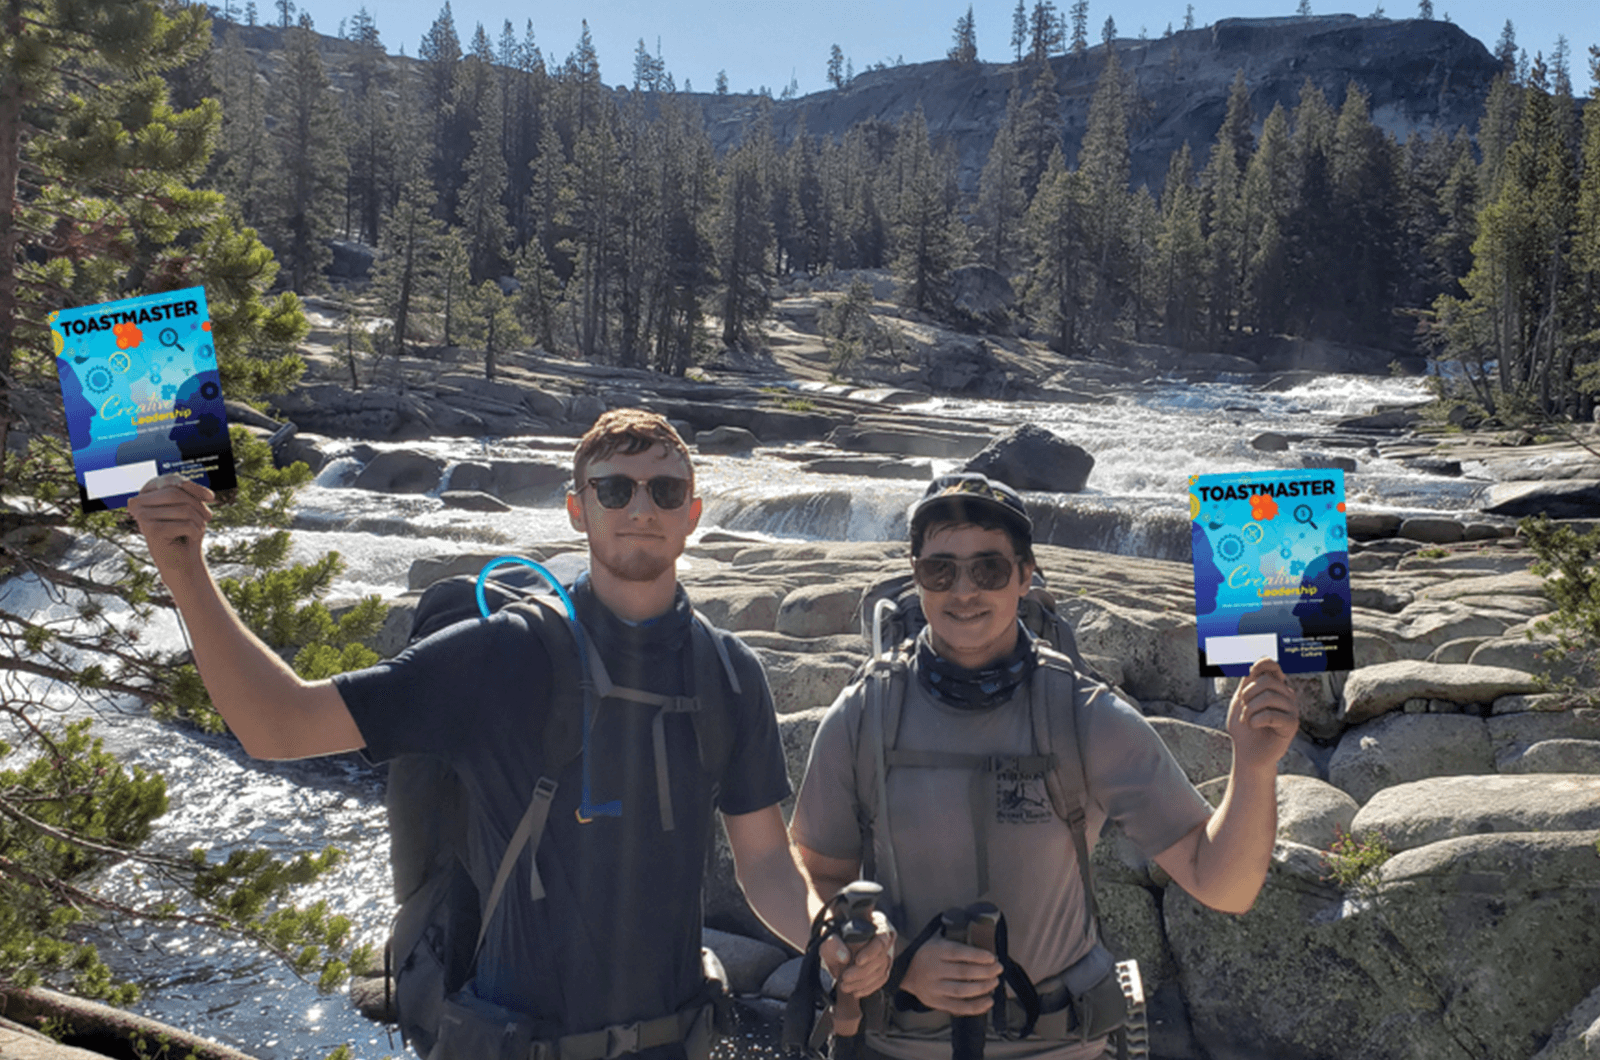 Caleb Thibodeaux and Brandon Killian, of San Diego, California, stop during a four-day, 48.85-mile (79-kilometer) backpacking trip with the Sierra Club through Yosemite National Park in California.